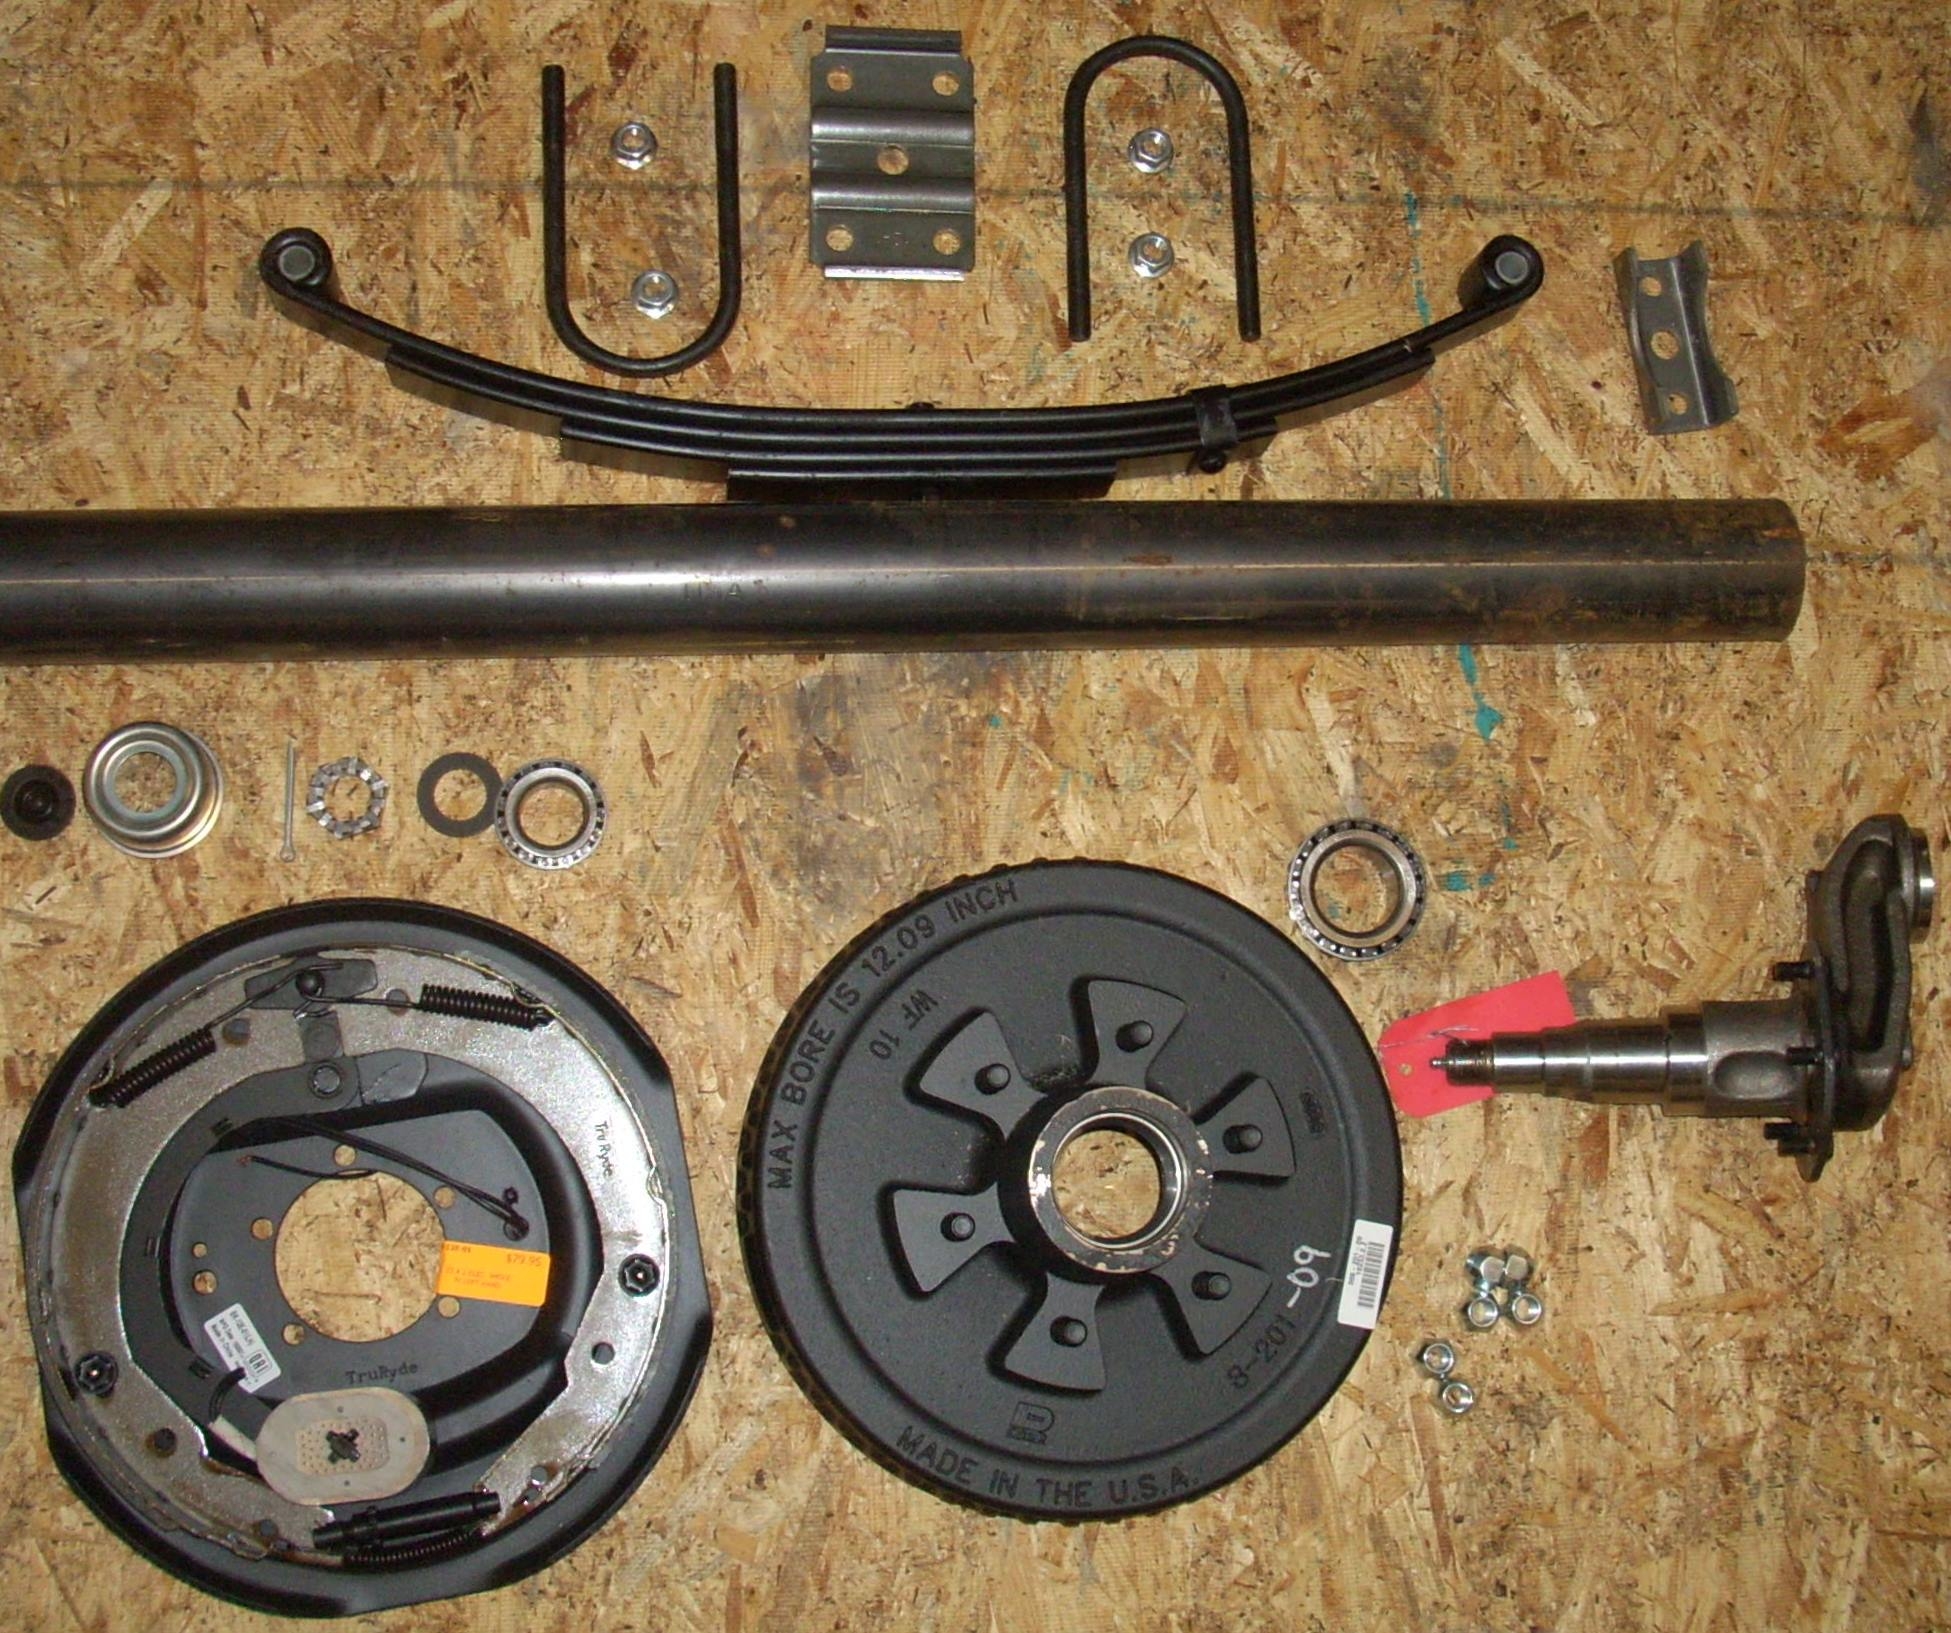 (Please note that all pictures of the axle kits are only for reference, and do not depict the actual kit itself.)